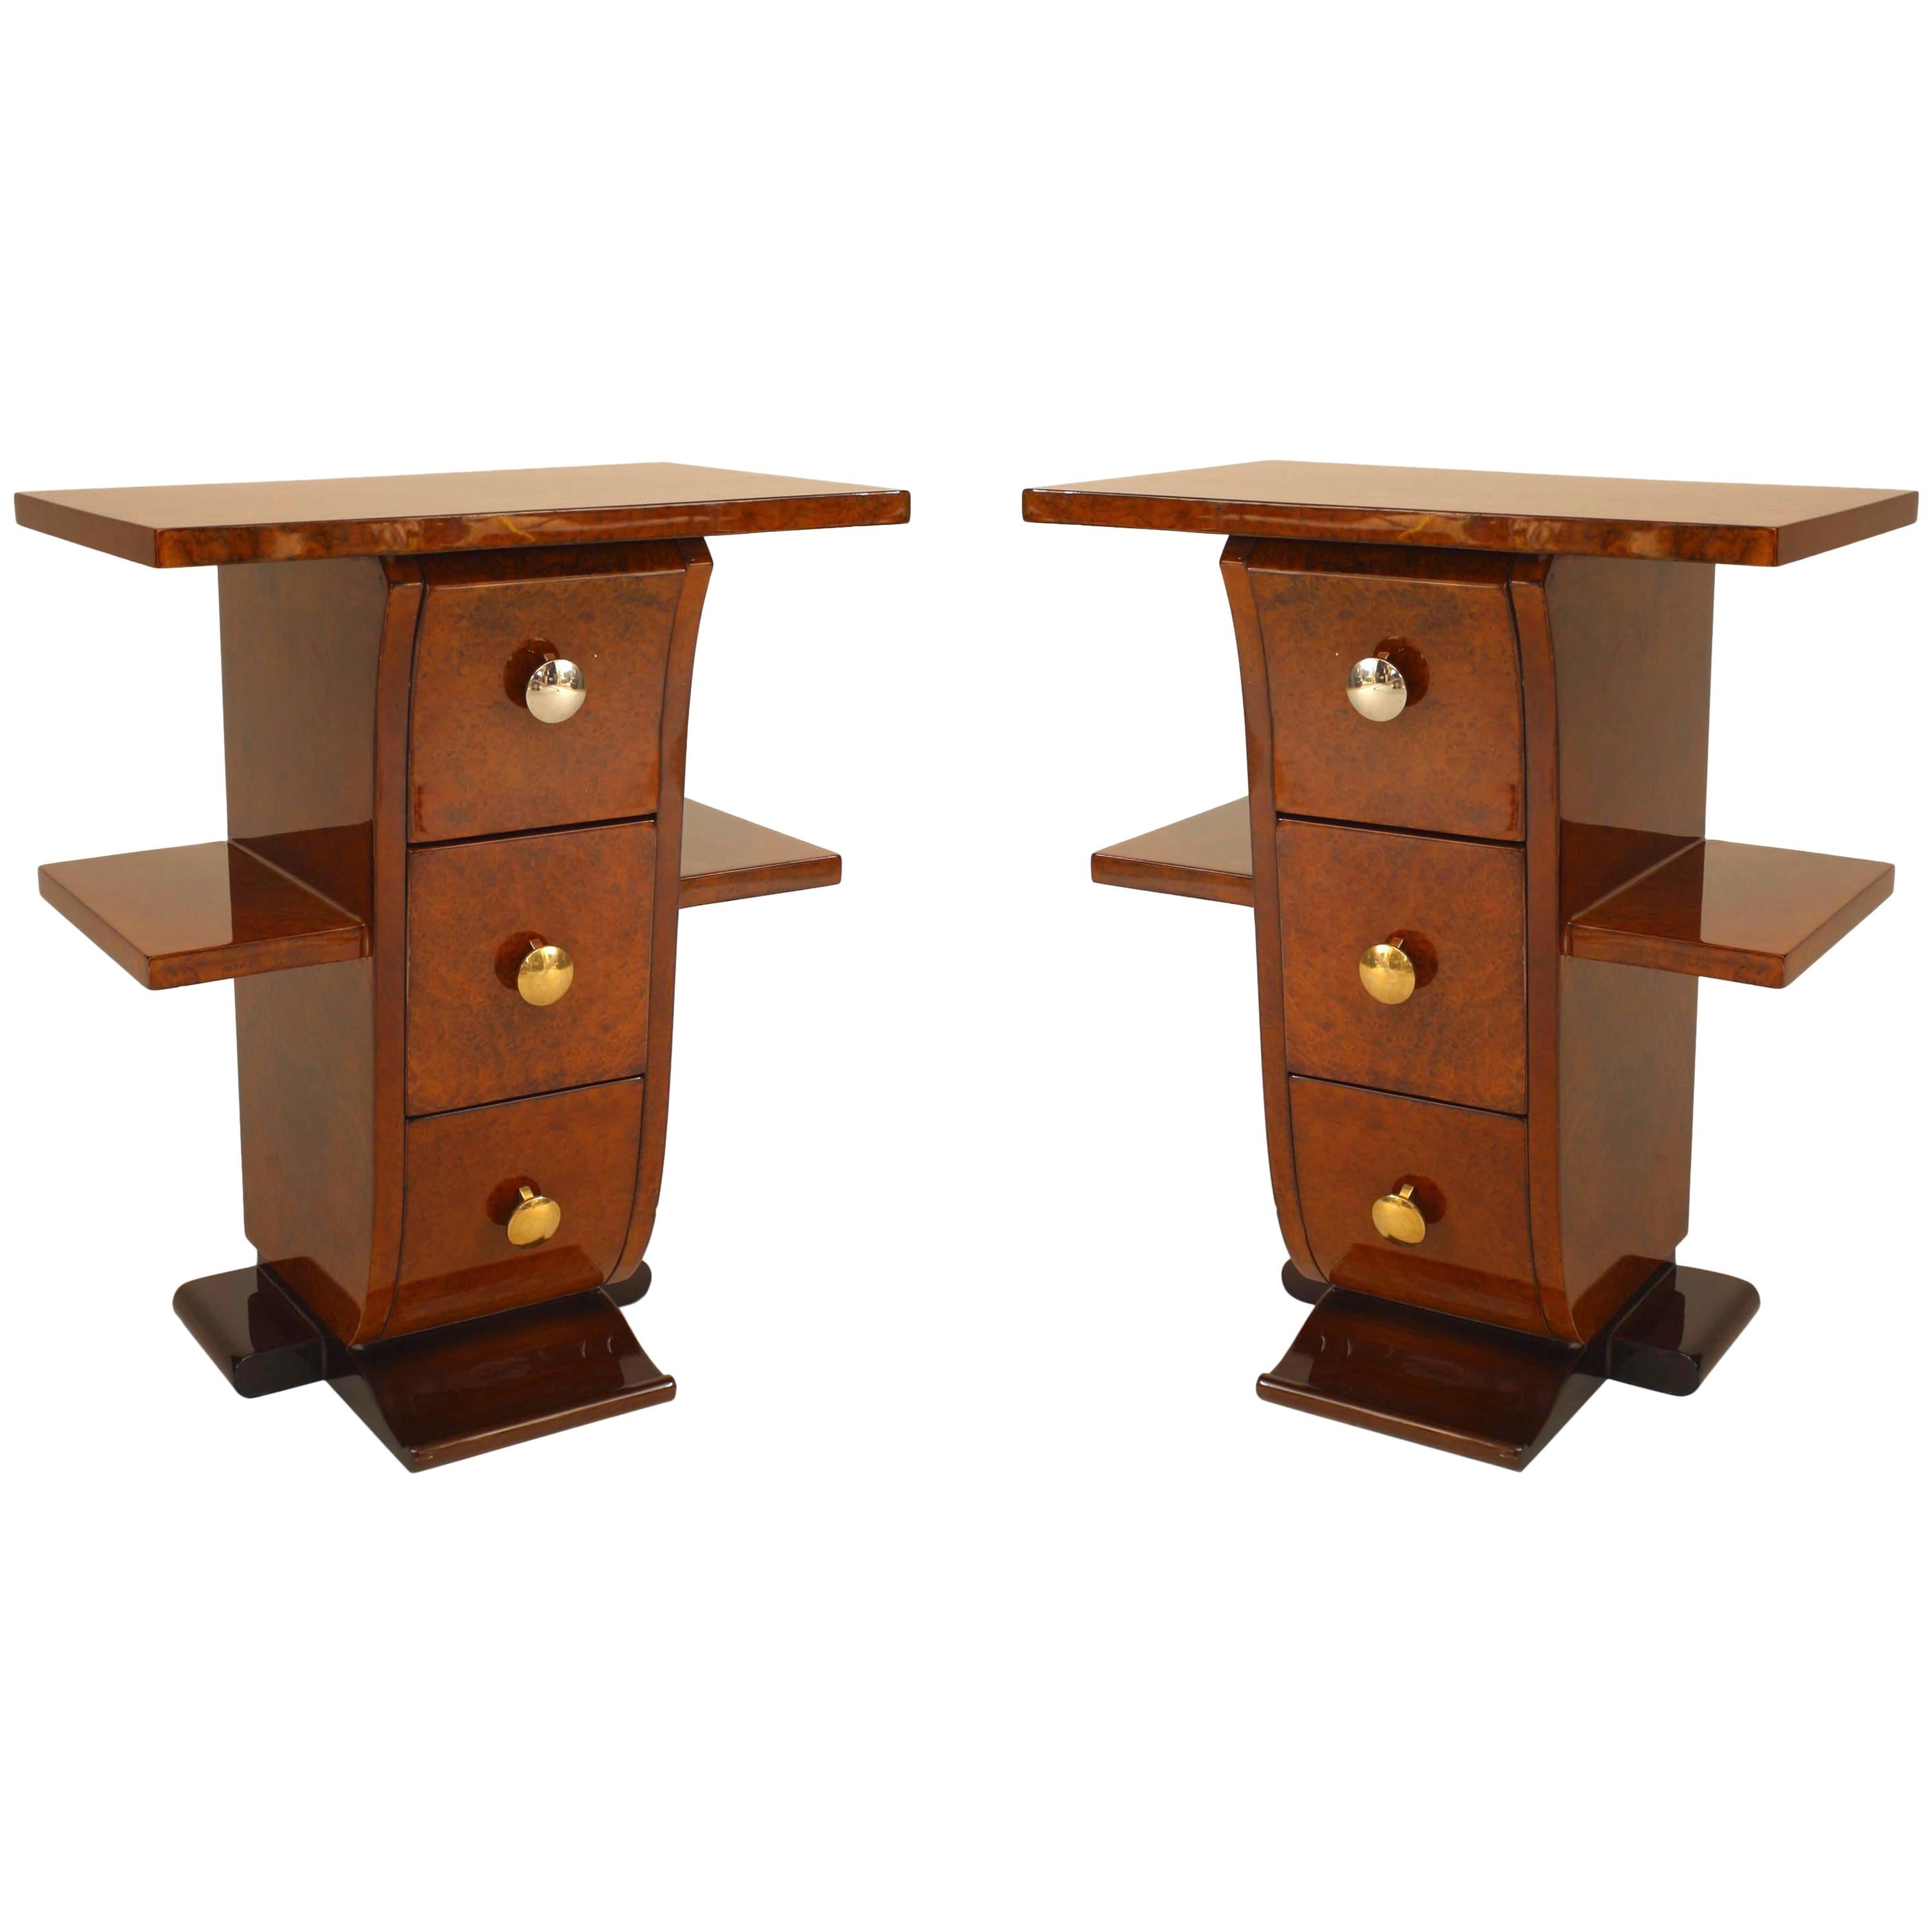 Pair of French Art Deco Amboyna Wooden End Tables